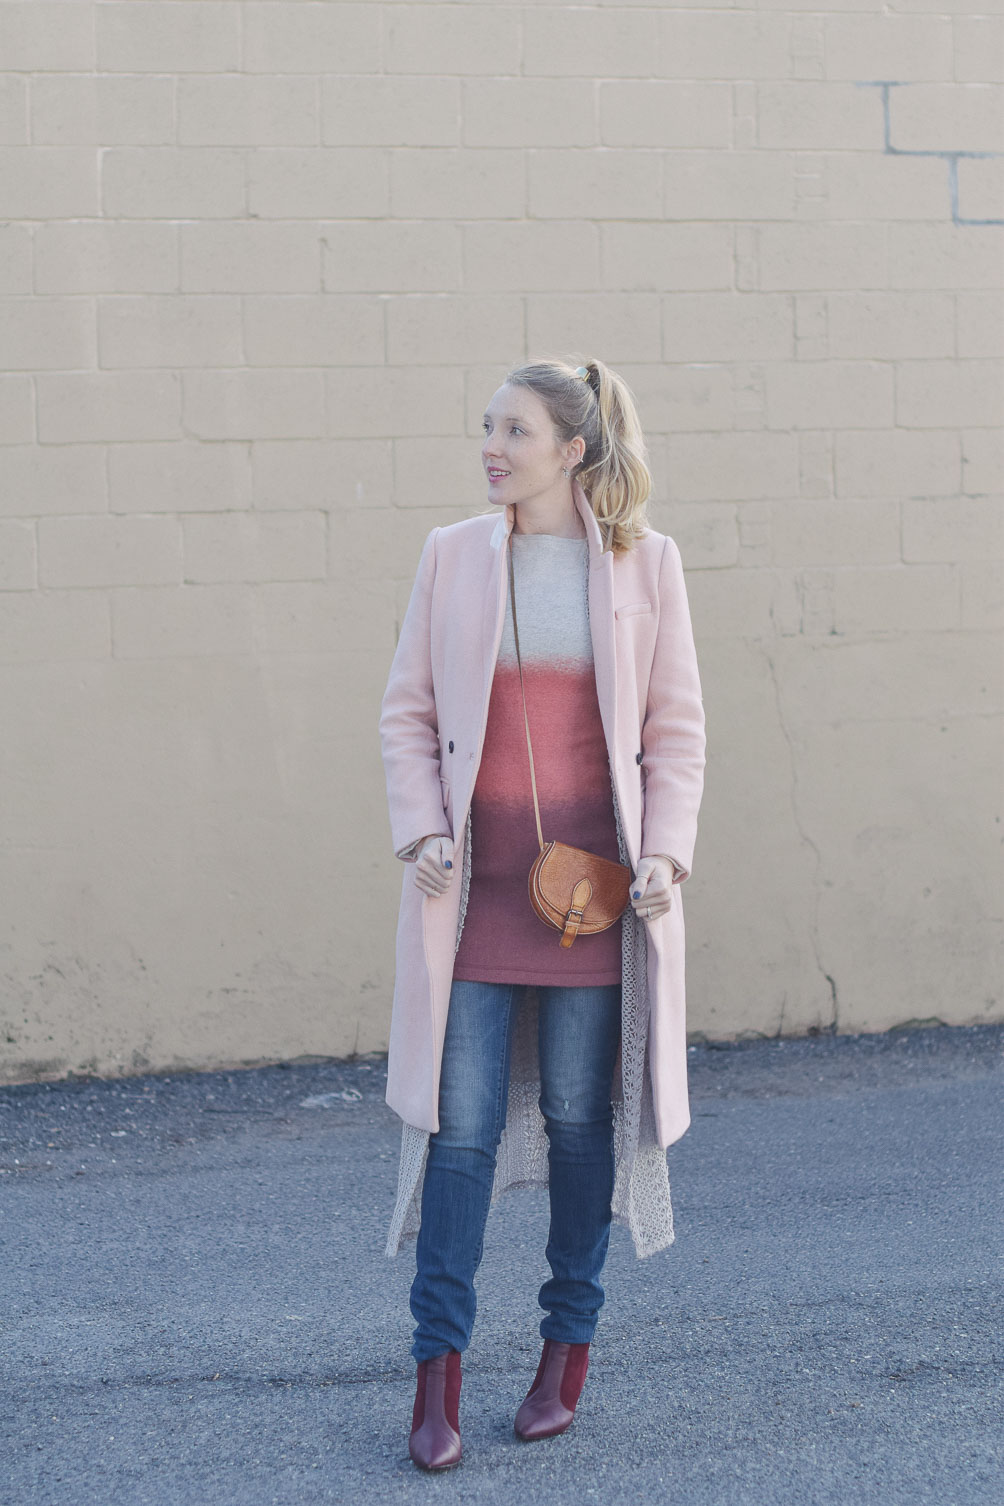 styling pink ombre layers for winter with a duster sweater, maternity jeans, and burgundy boots